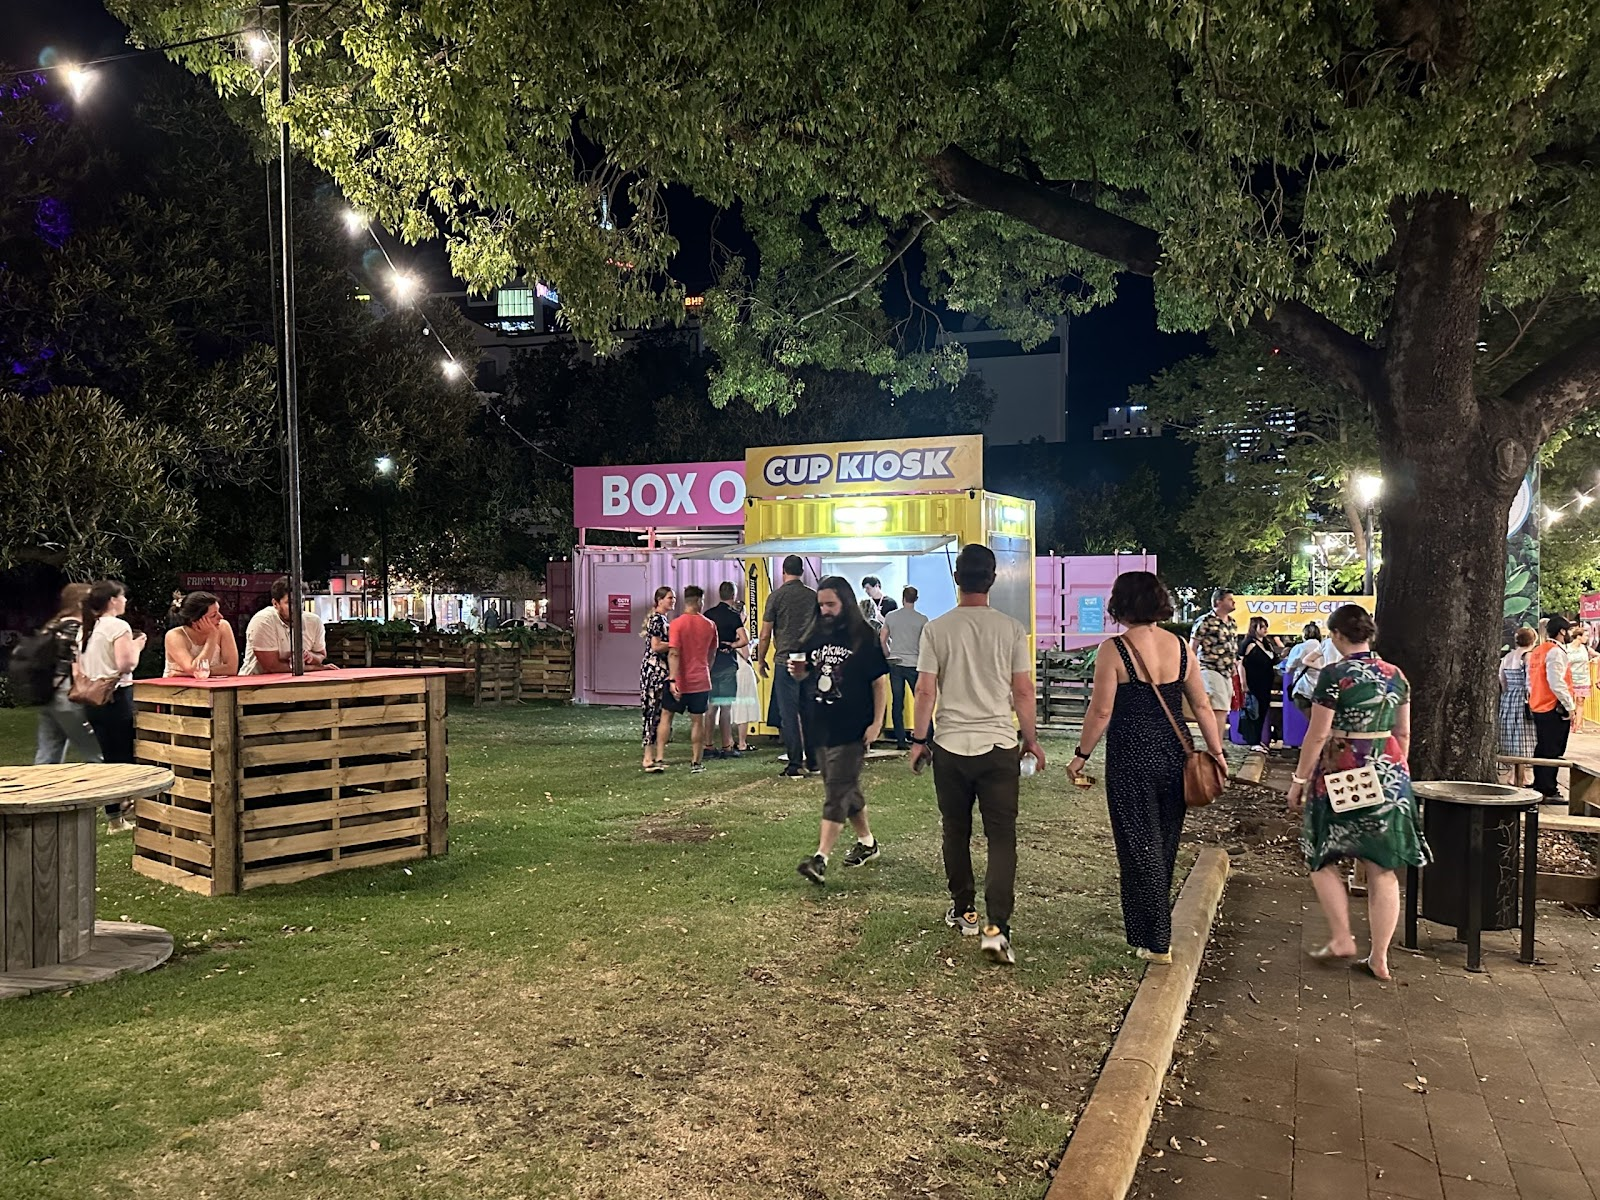 Nighttime scene at an outdoor event with people walking past colorful shipping container booths under tree canopy.